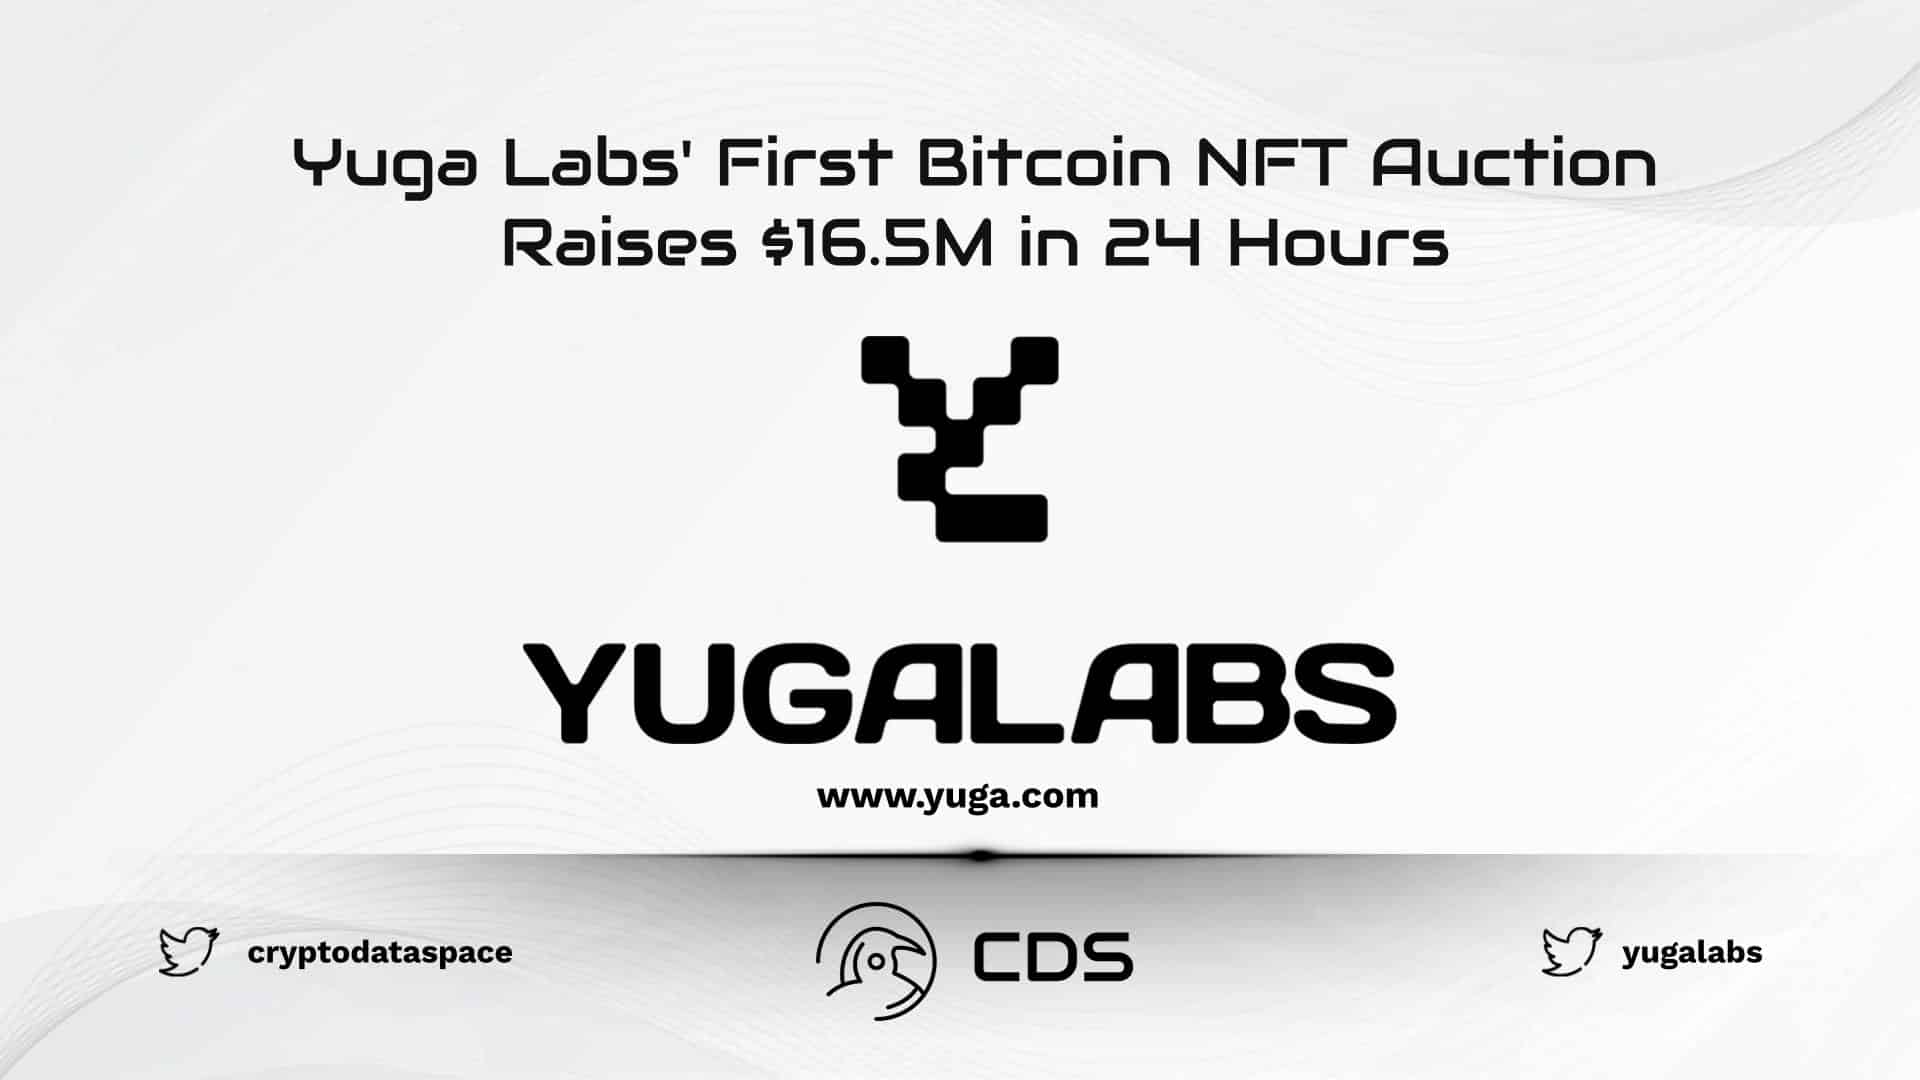 Yuga Labs' First Bitcoin NFT Auction Raises $16.5M in 24 Hours